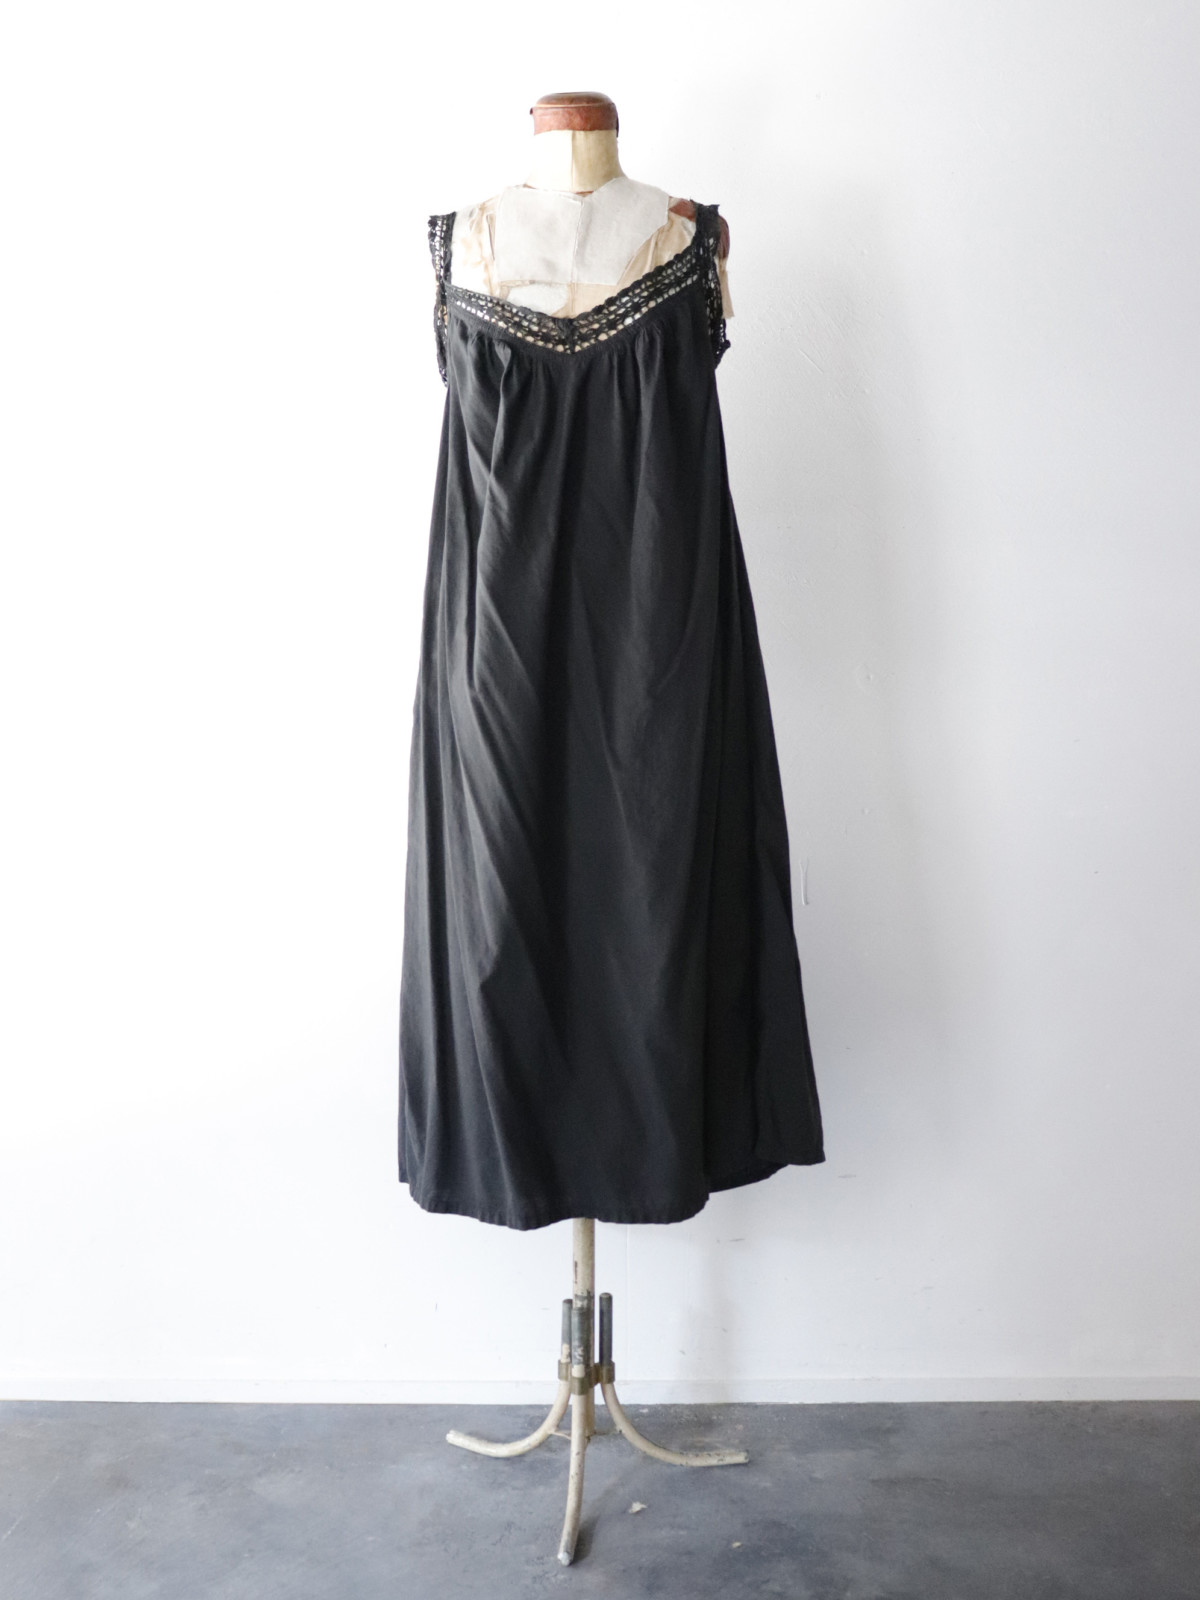 black‐dyed, vintage, one-piece